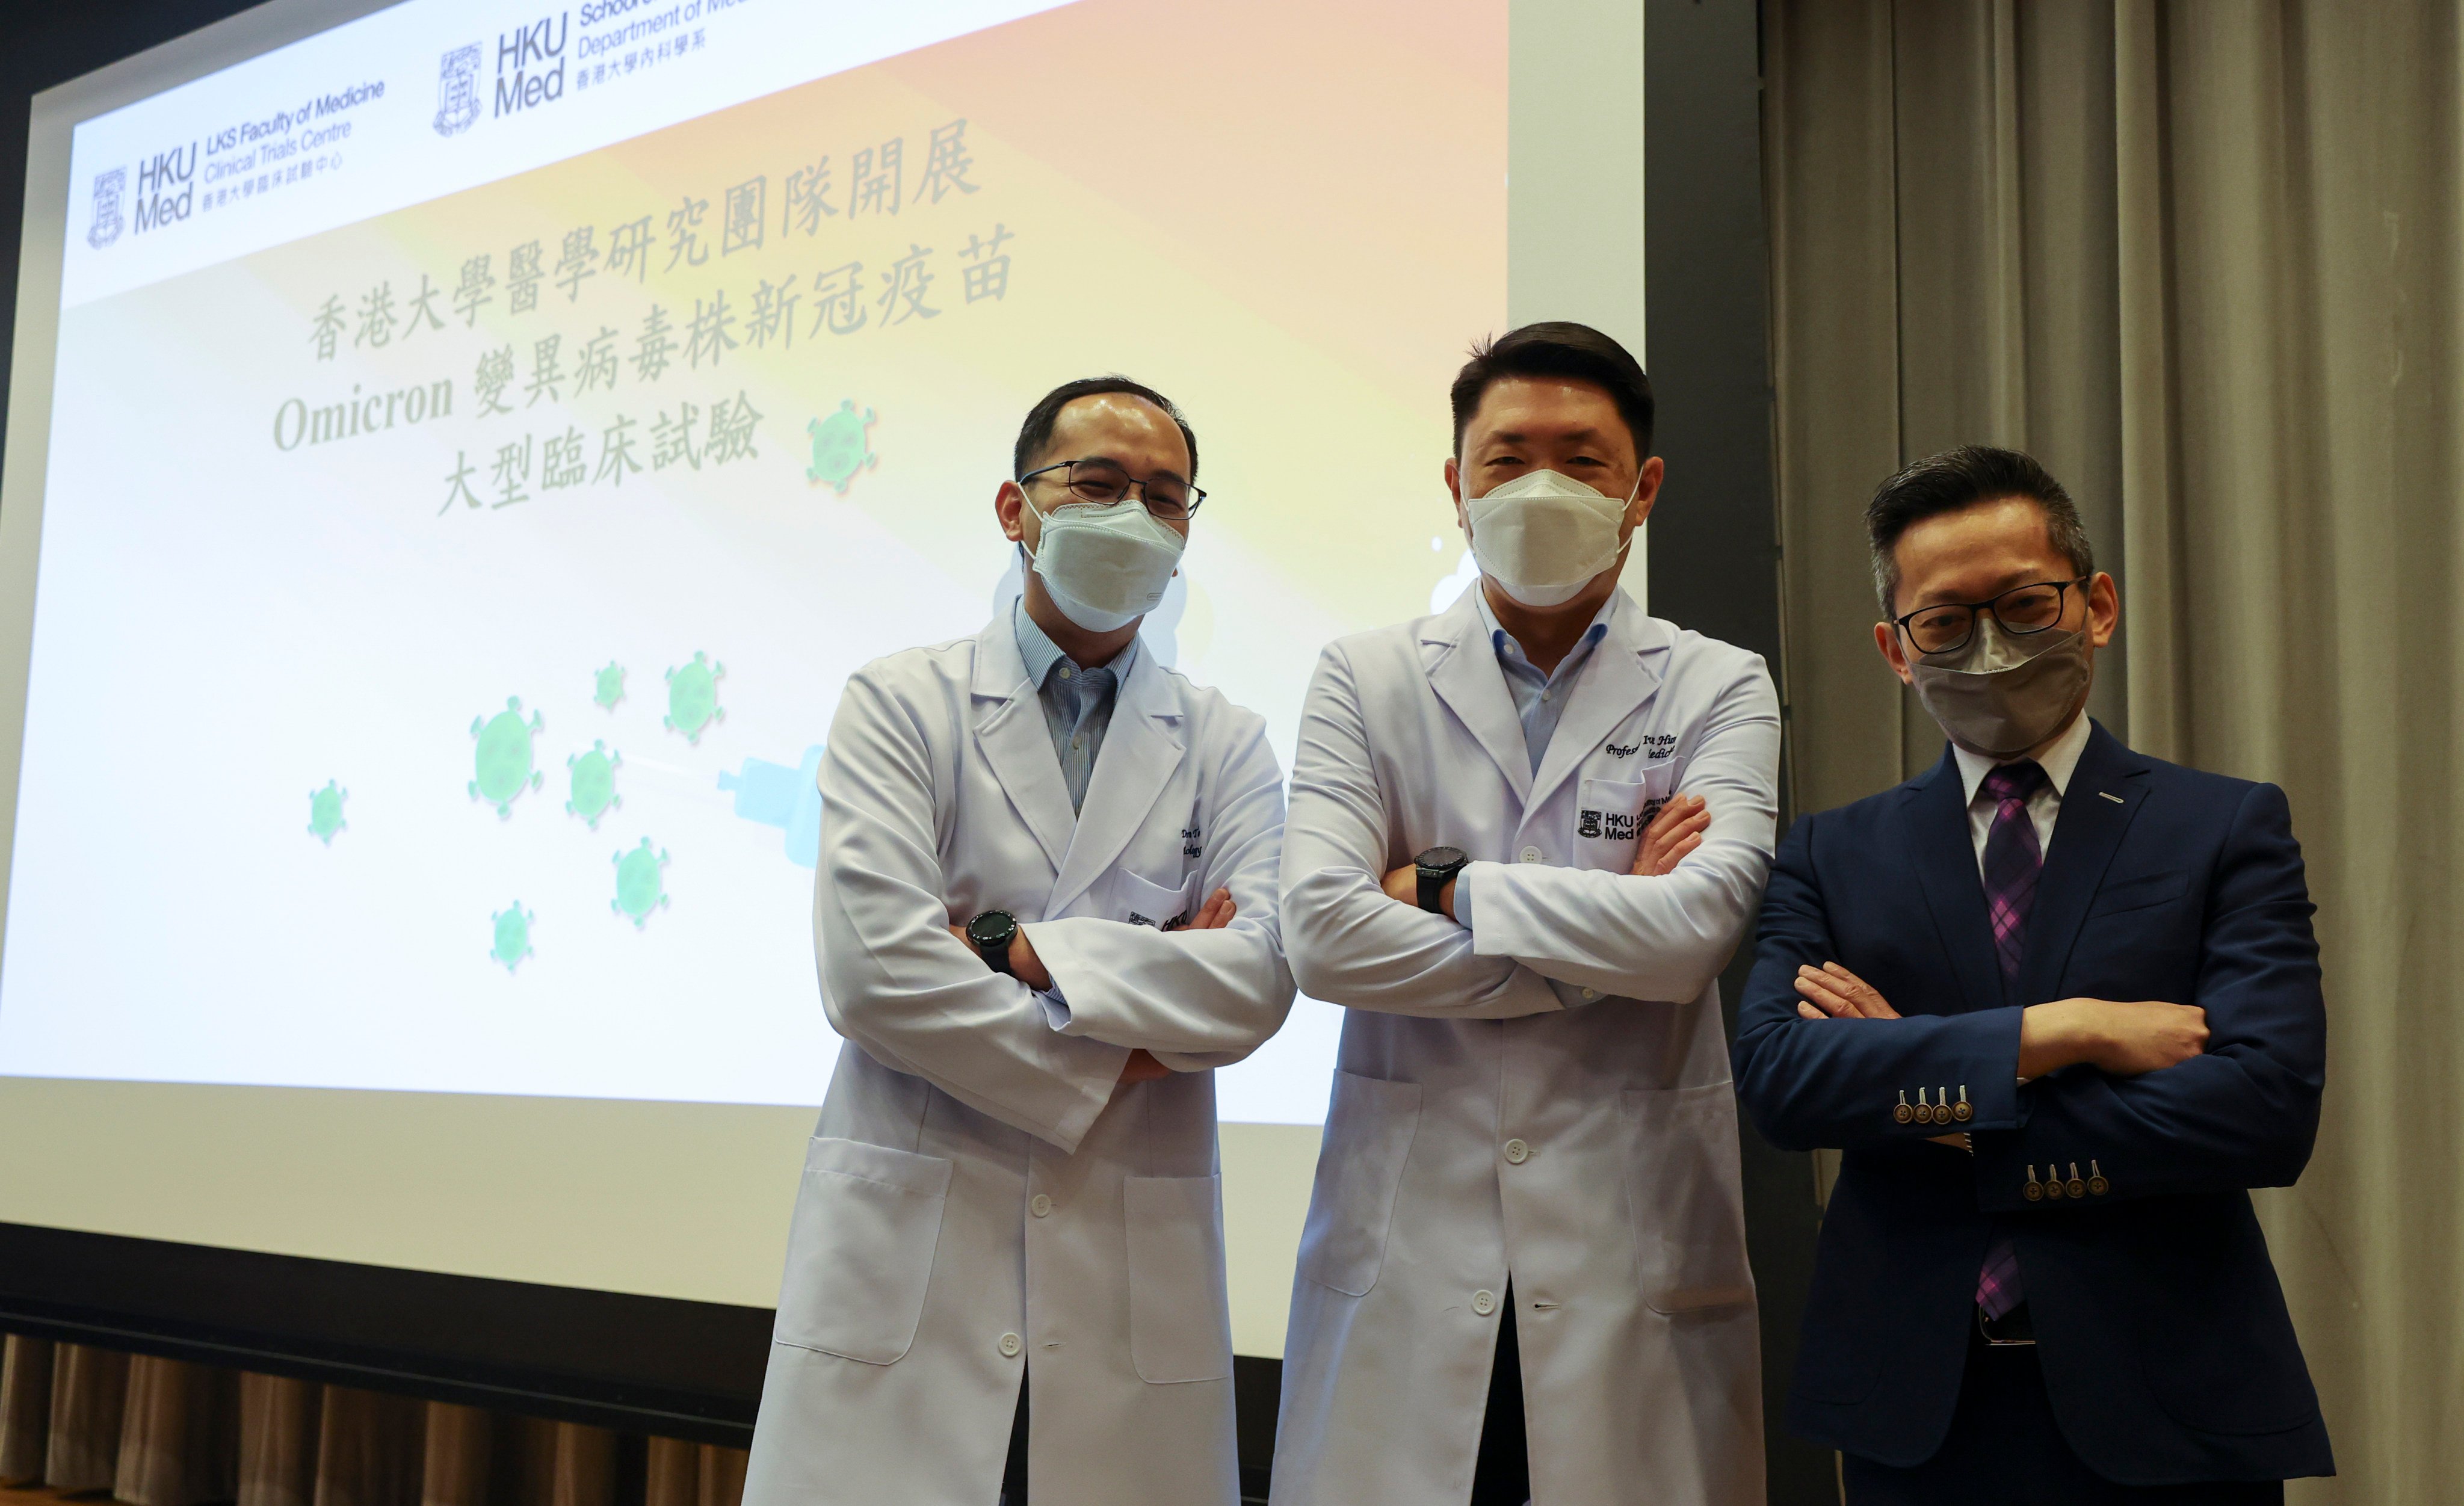 University of Hong Kong and Sinopharm test city’s first Omicron-targeting vaccine. Photo: Edmond So